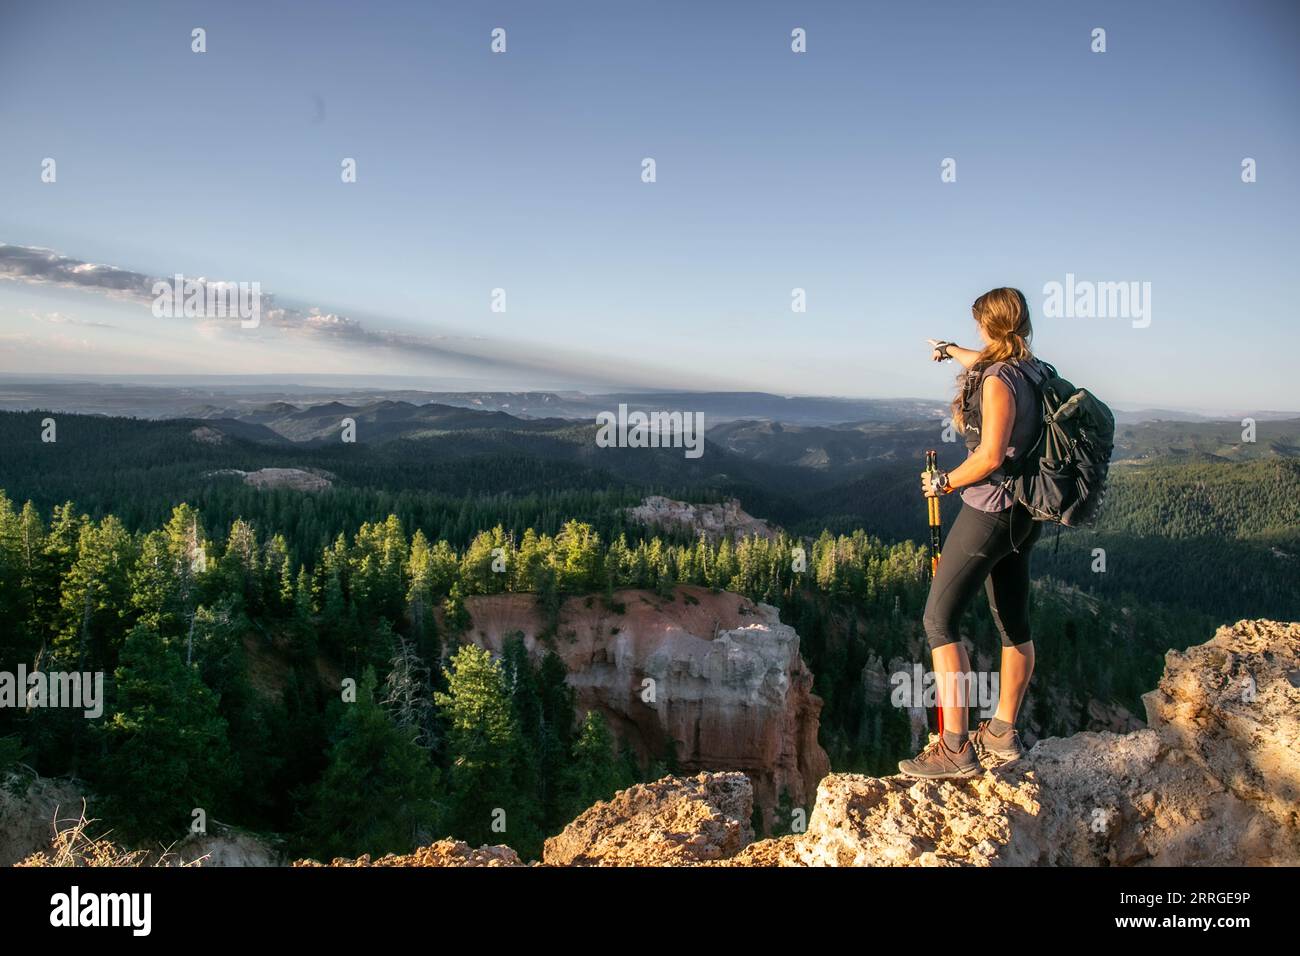 A woman in athletic clothing points to the horizon Stock Photo